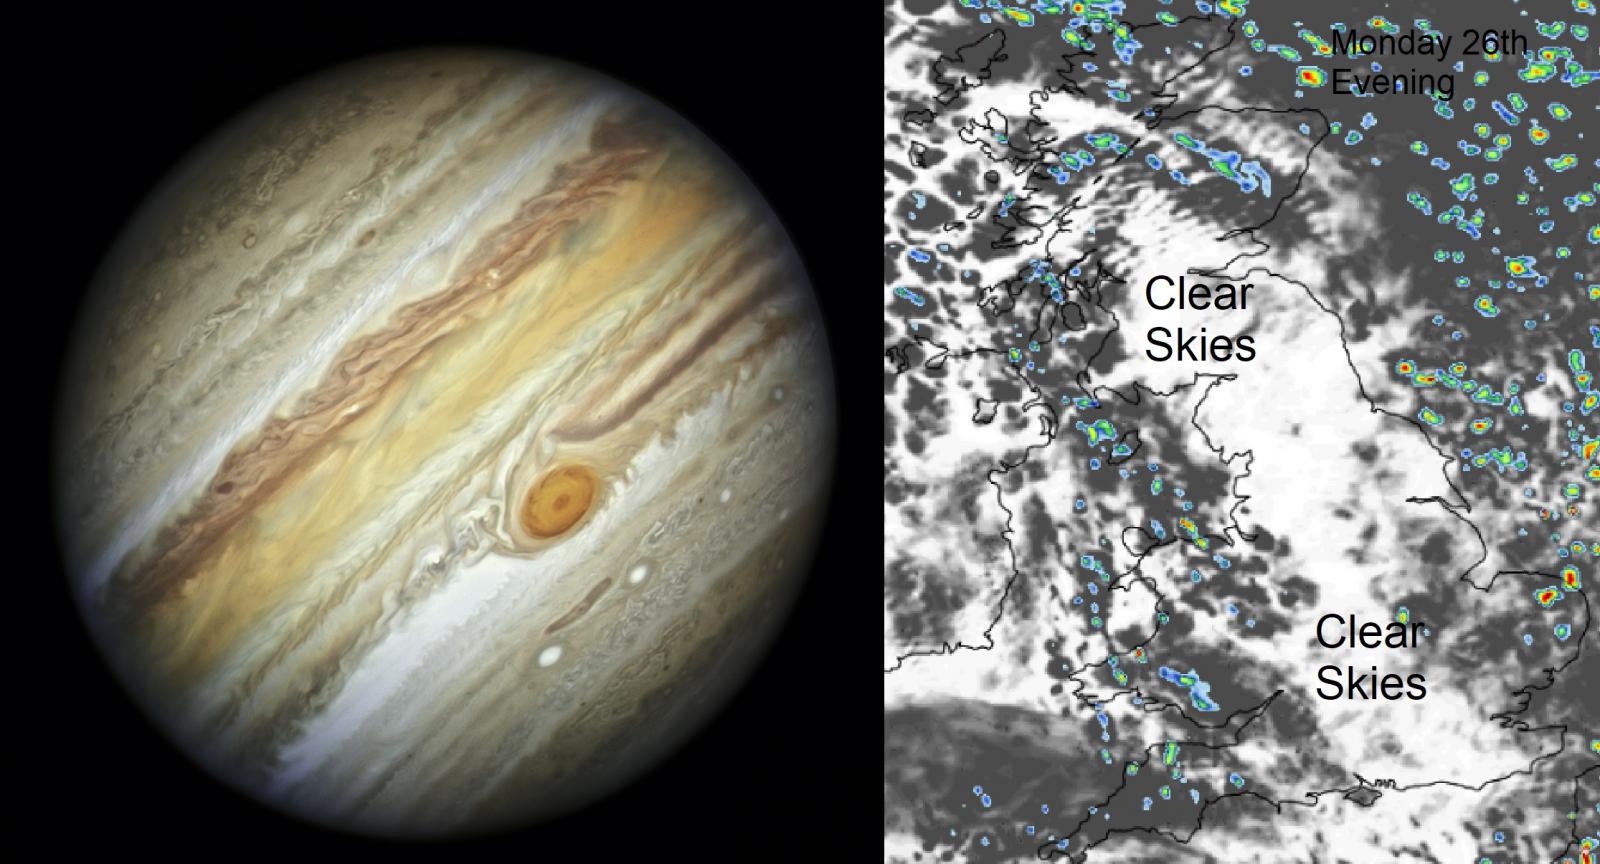 Jupiter viewing UK weather - clear skies with just a scattering of showers tonight